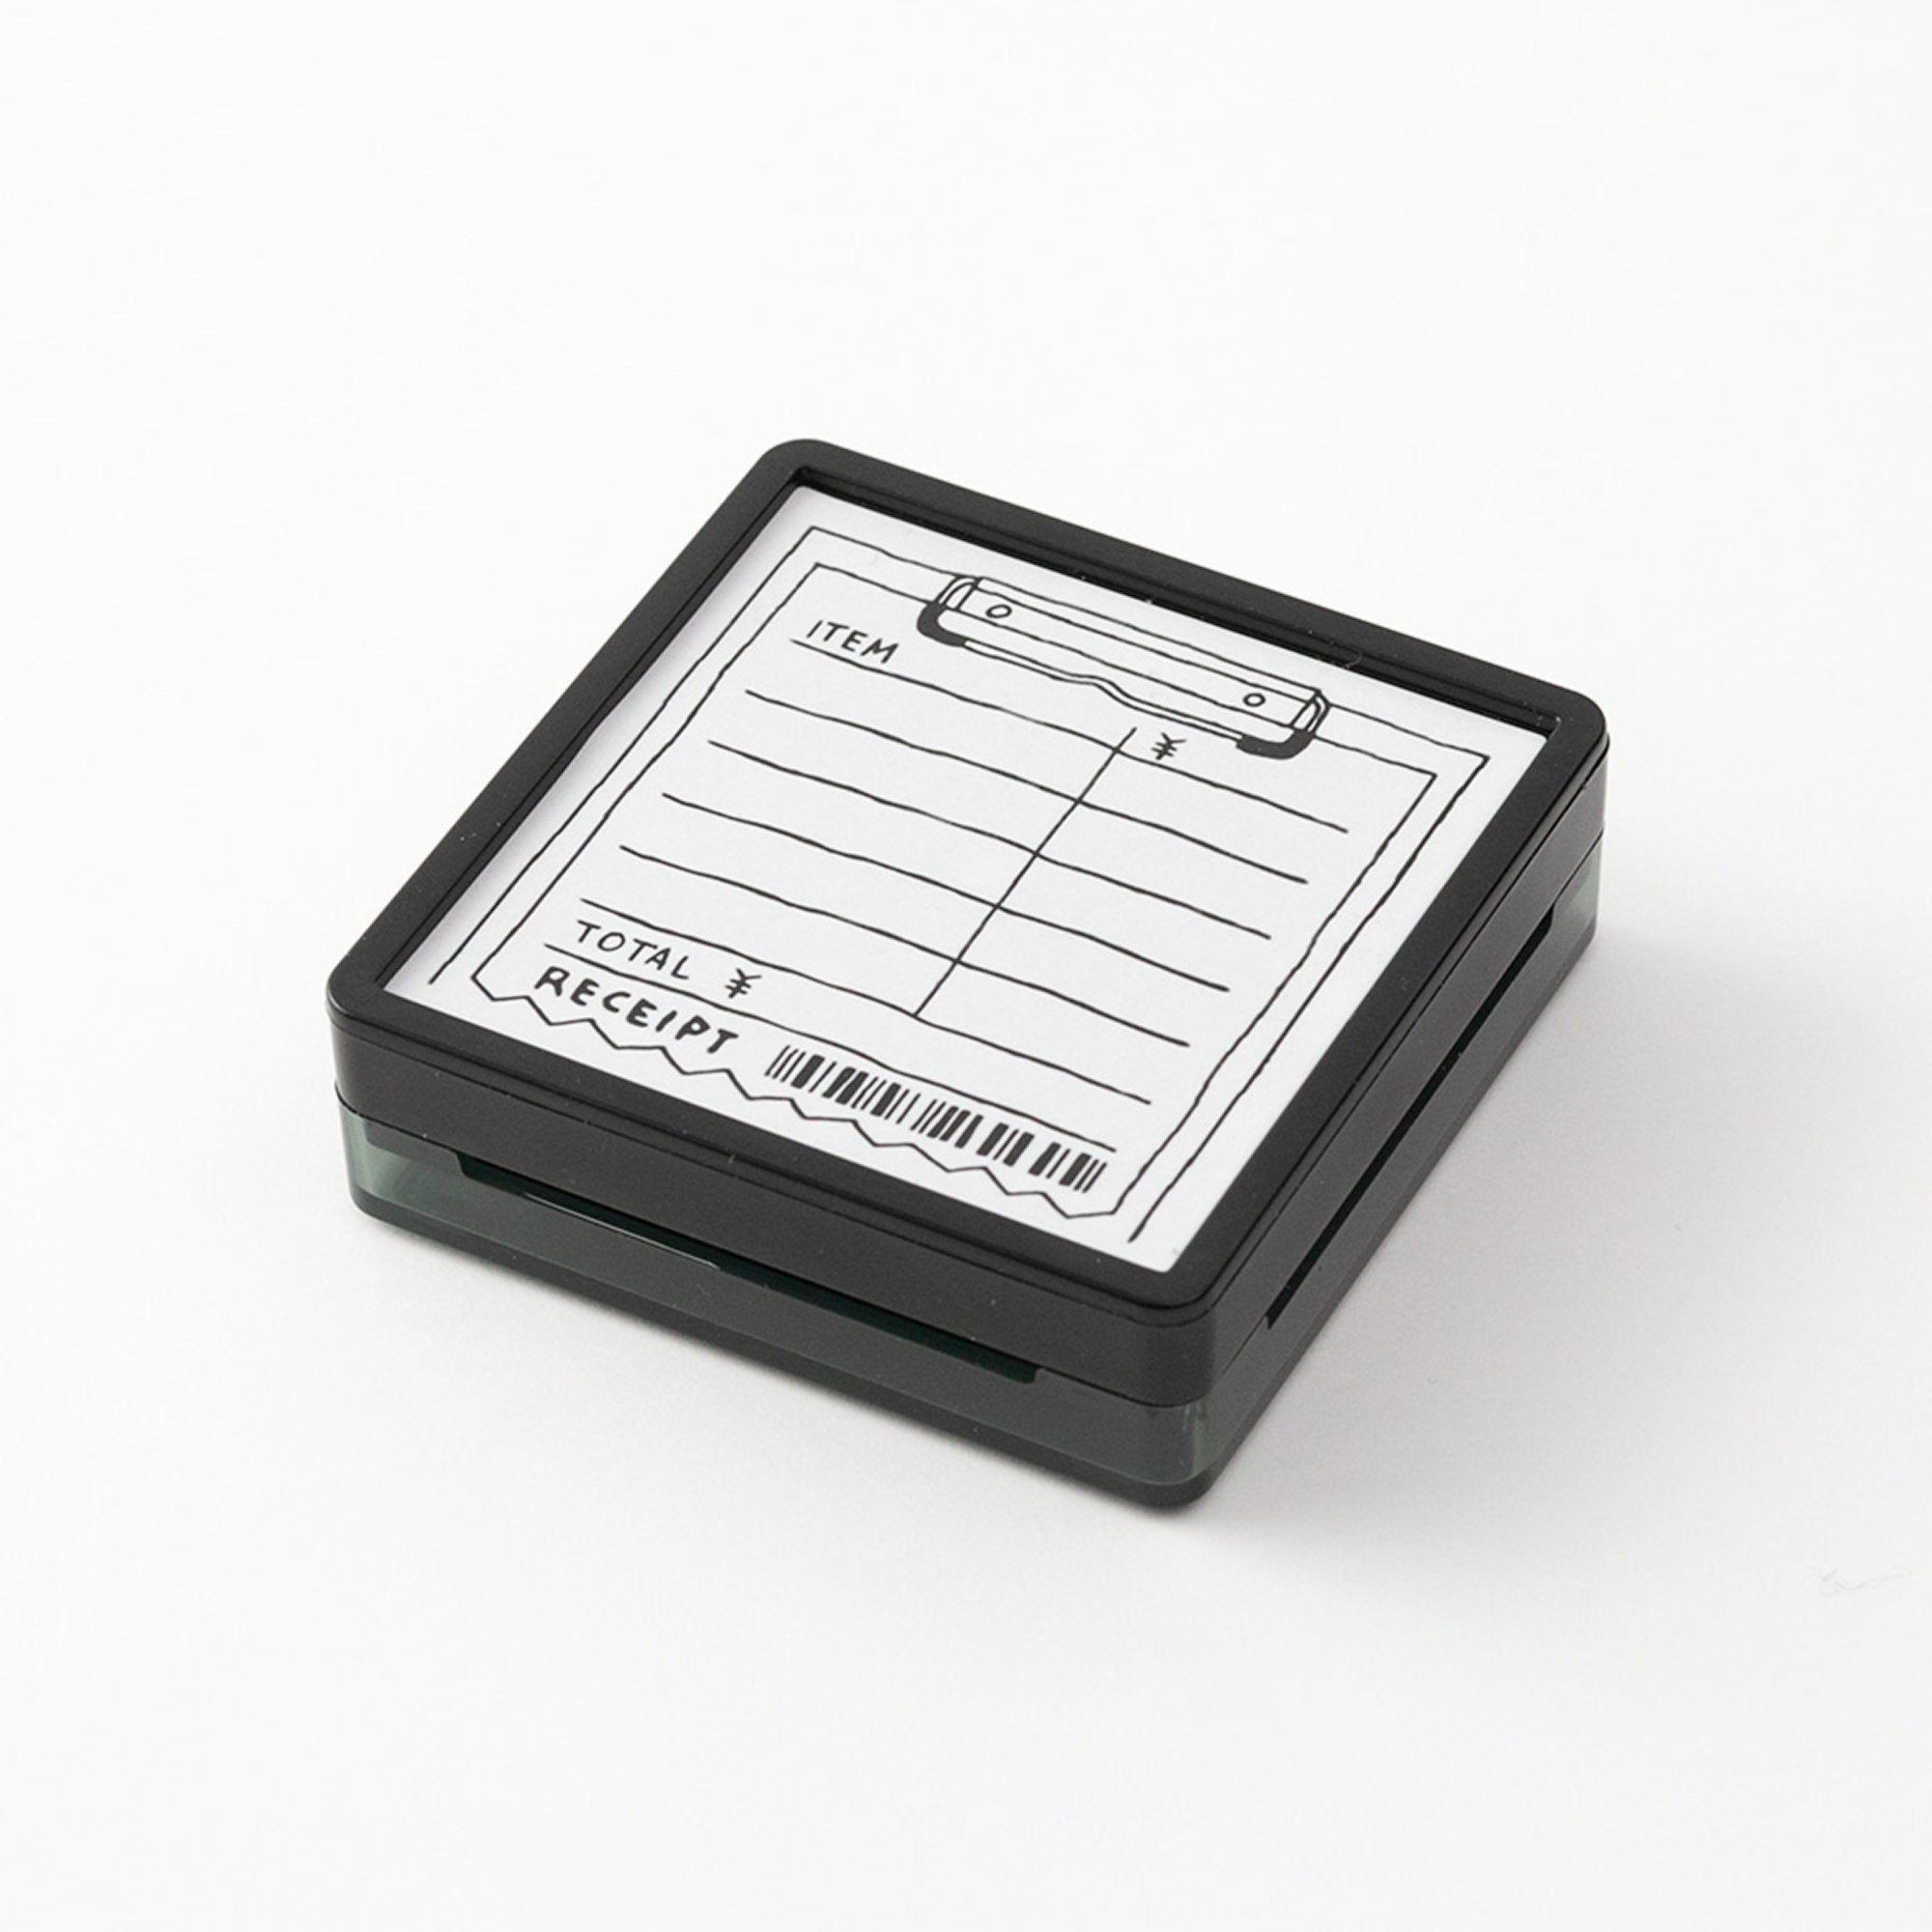 Midori Square Paintable Stamp Re-Inkable Self-Inking Stamp | MONEY TRACKING Ledger Receipt Blue Package - The Stationery Life!